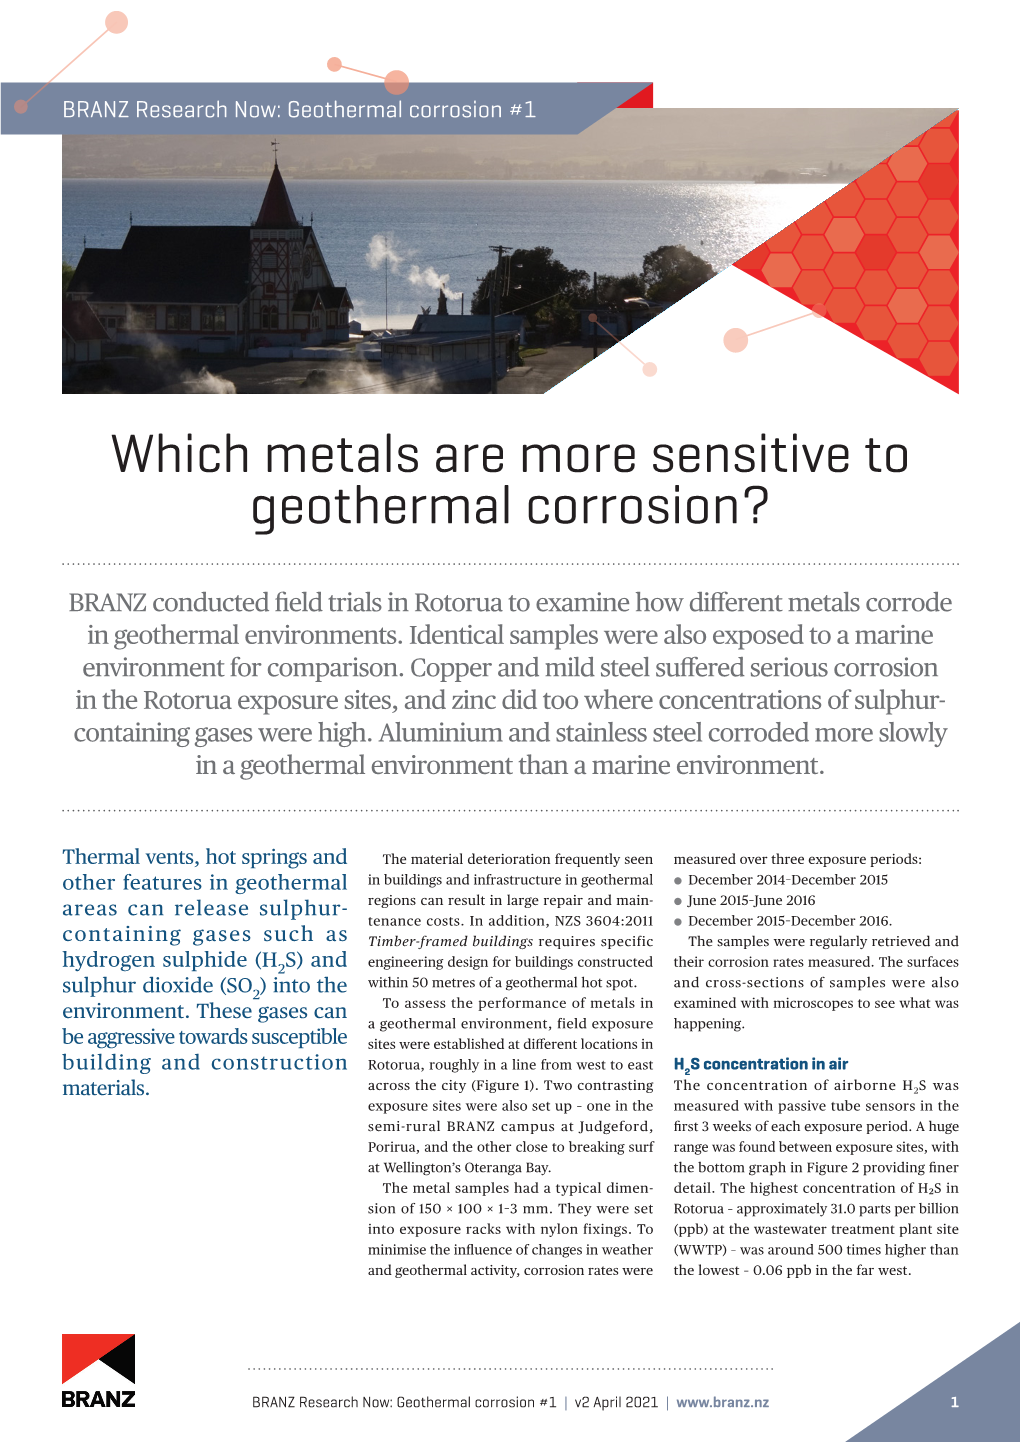 Which Metals Are More Sensitive to Geothermal Corrosion?